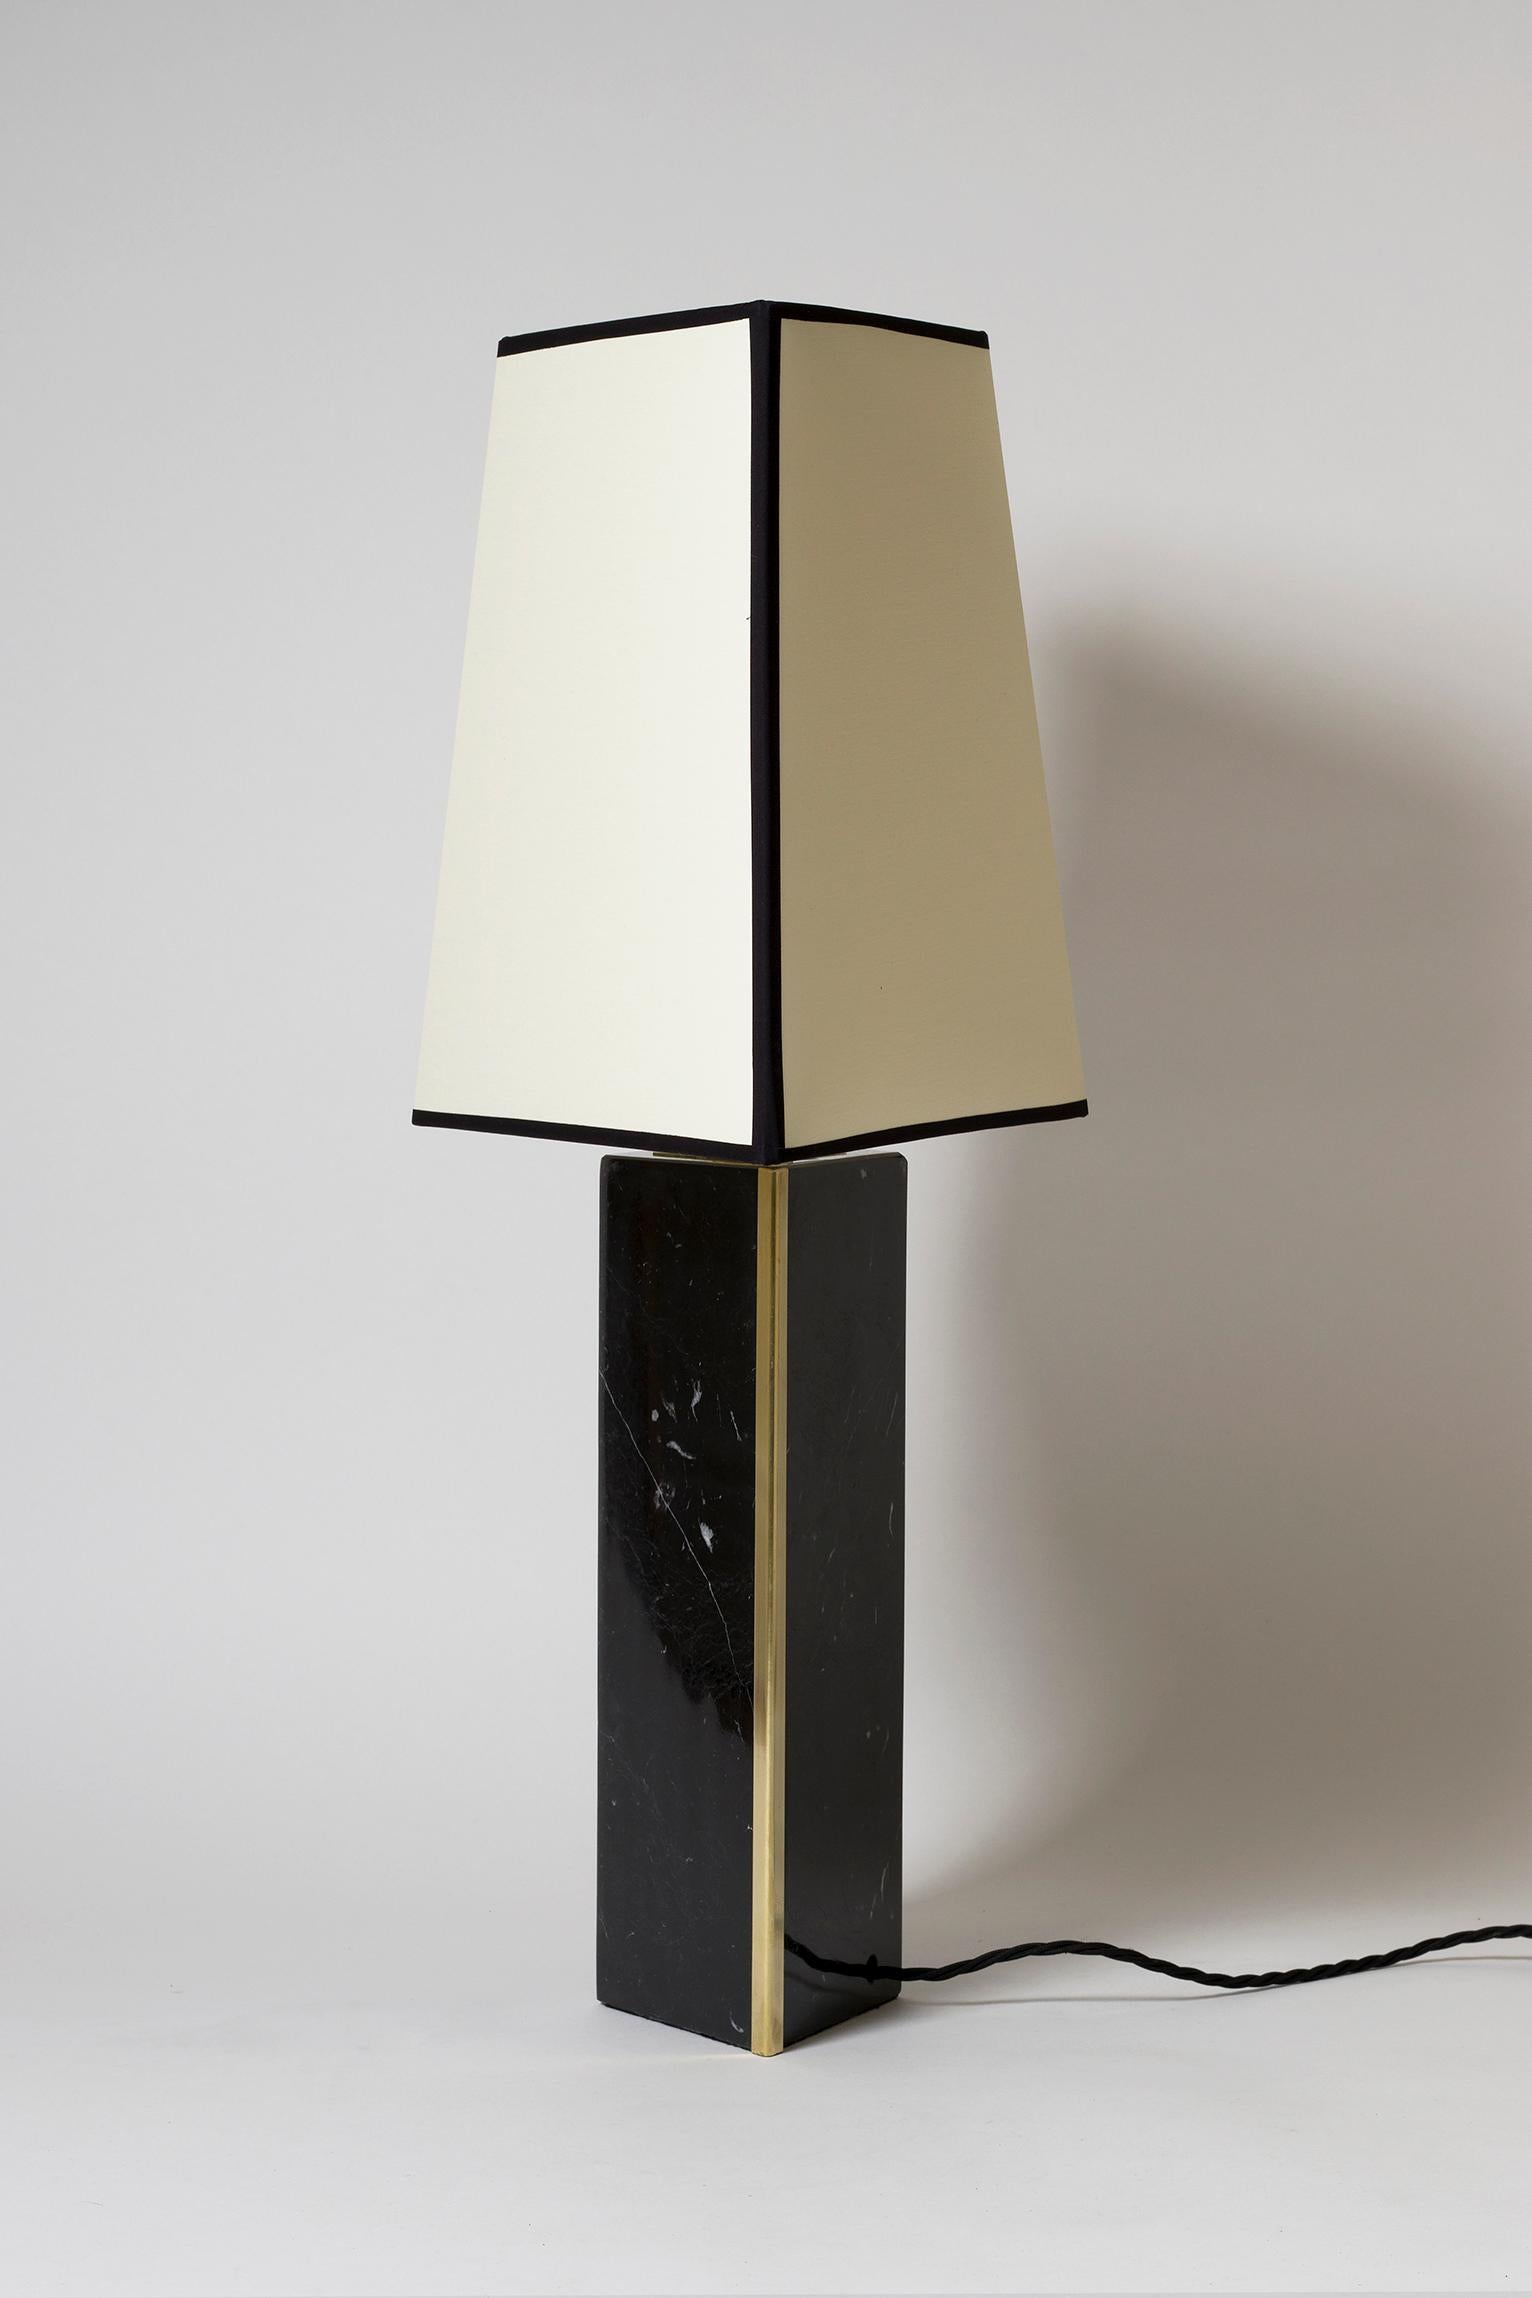 Contemporary Pair of Black Marble and Brass Table Lamp, by Dorian Caffot de Fawes